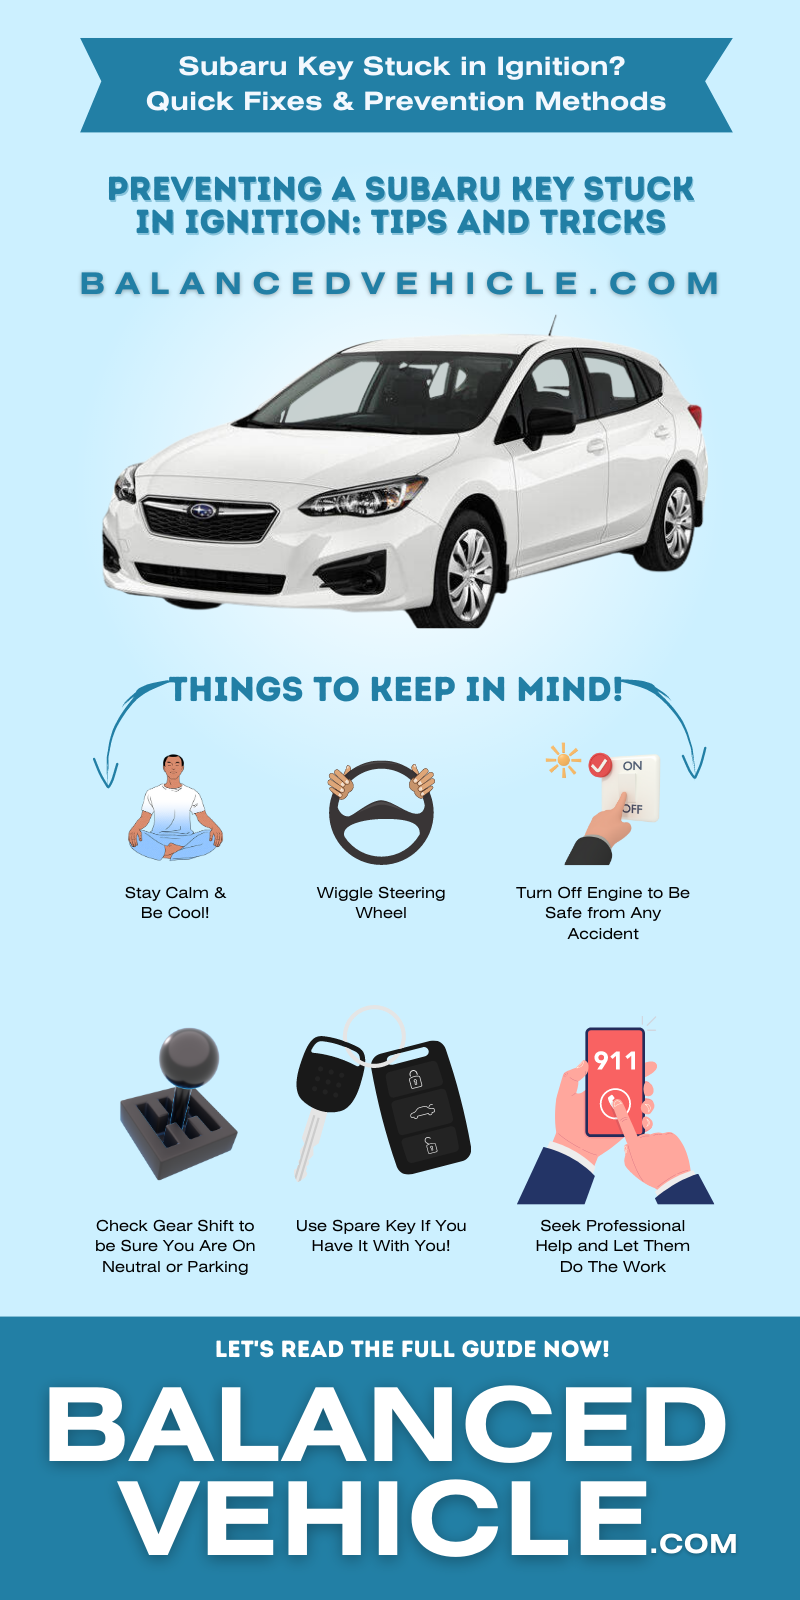 Subaru Key stuck in ignition recall 2021 steps to take and prevention methods infographic